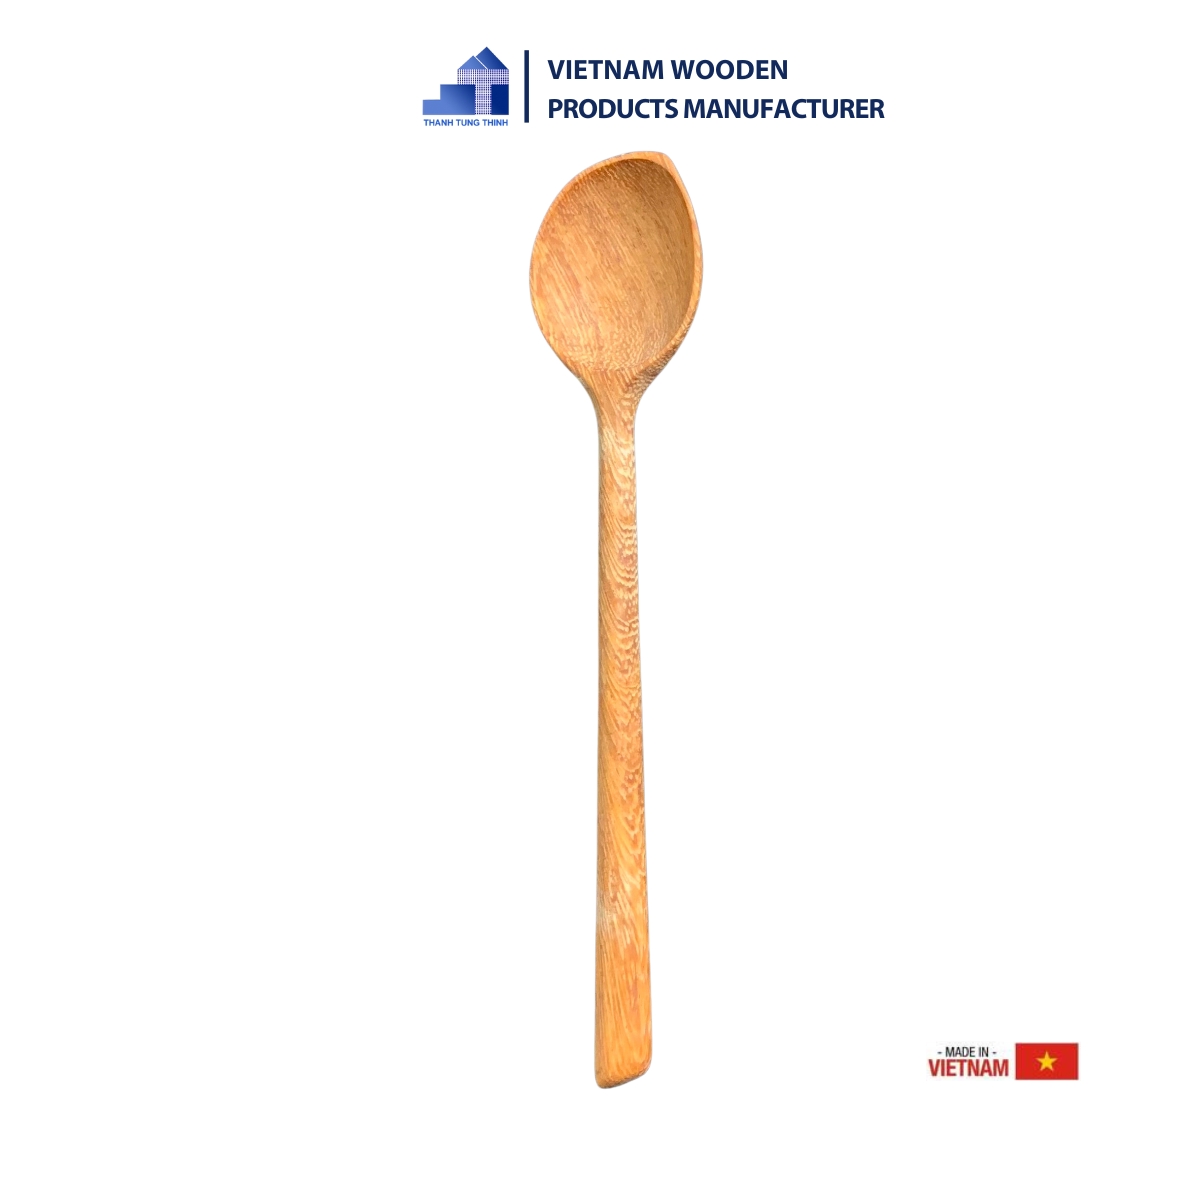 The wooden spoon shaped like a leaf is a high-quality product